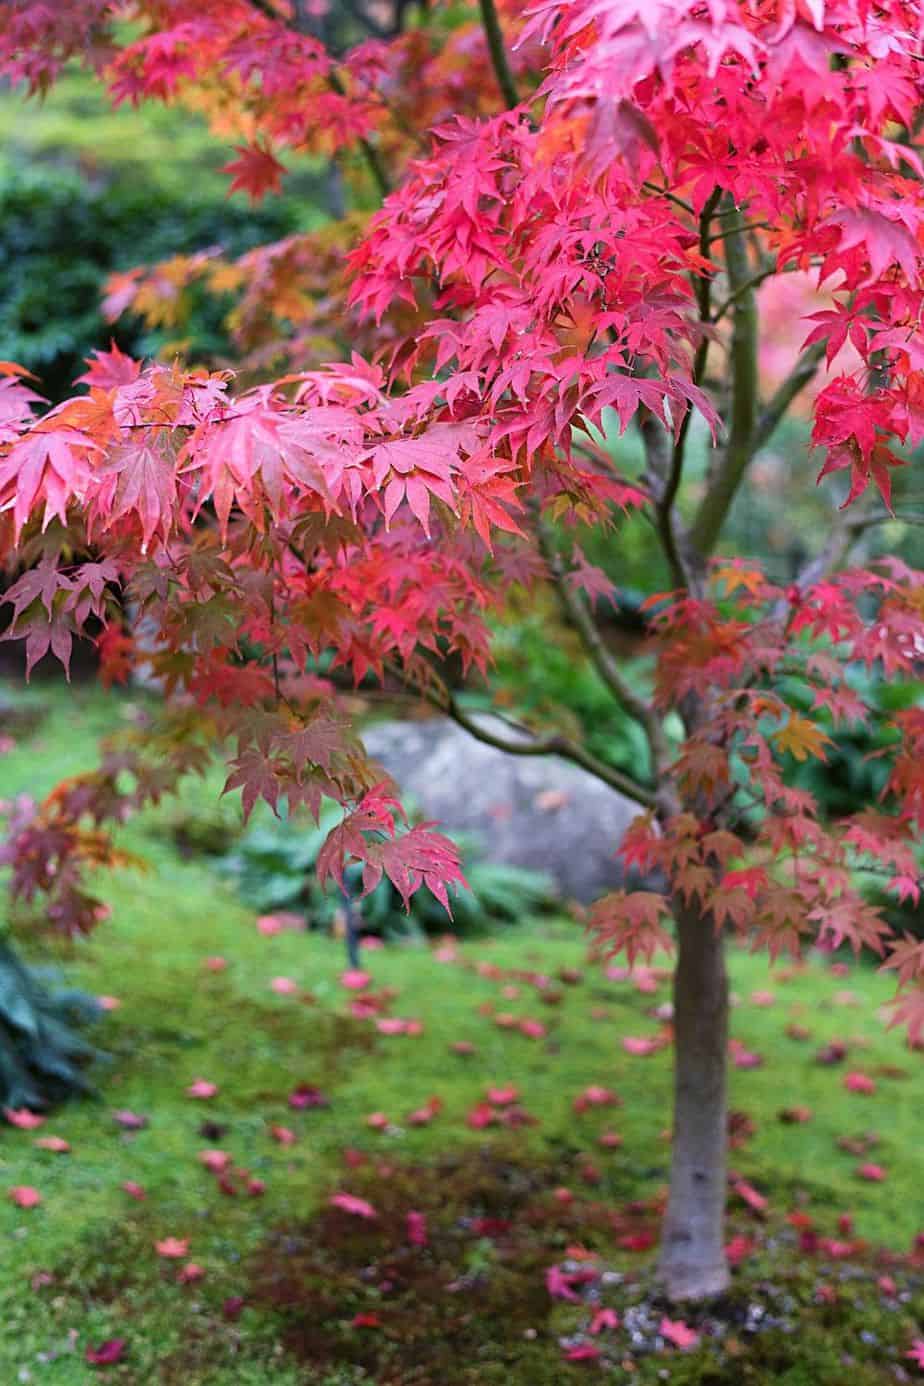 Japanese Maple loves cold, damp areas like the east-facing side of the house